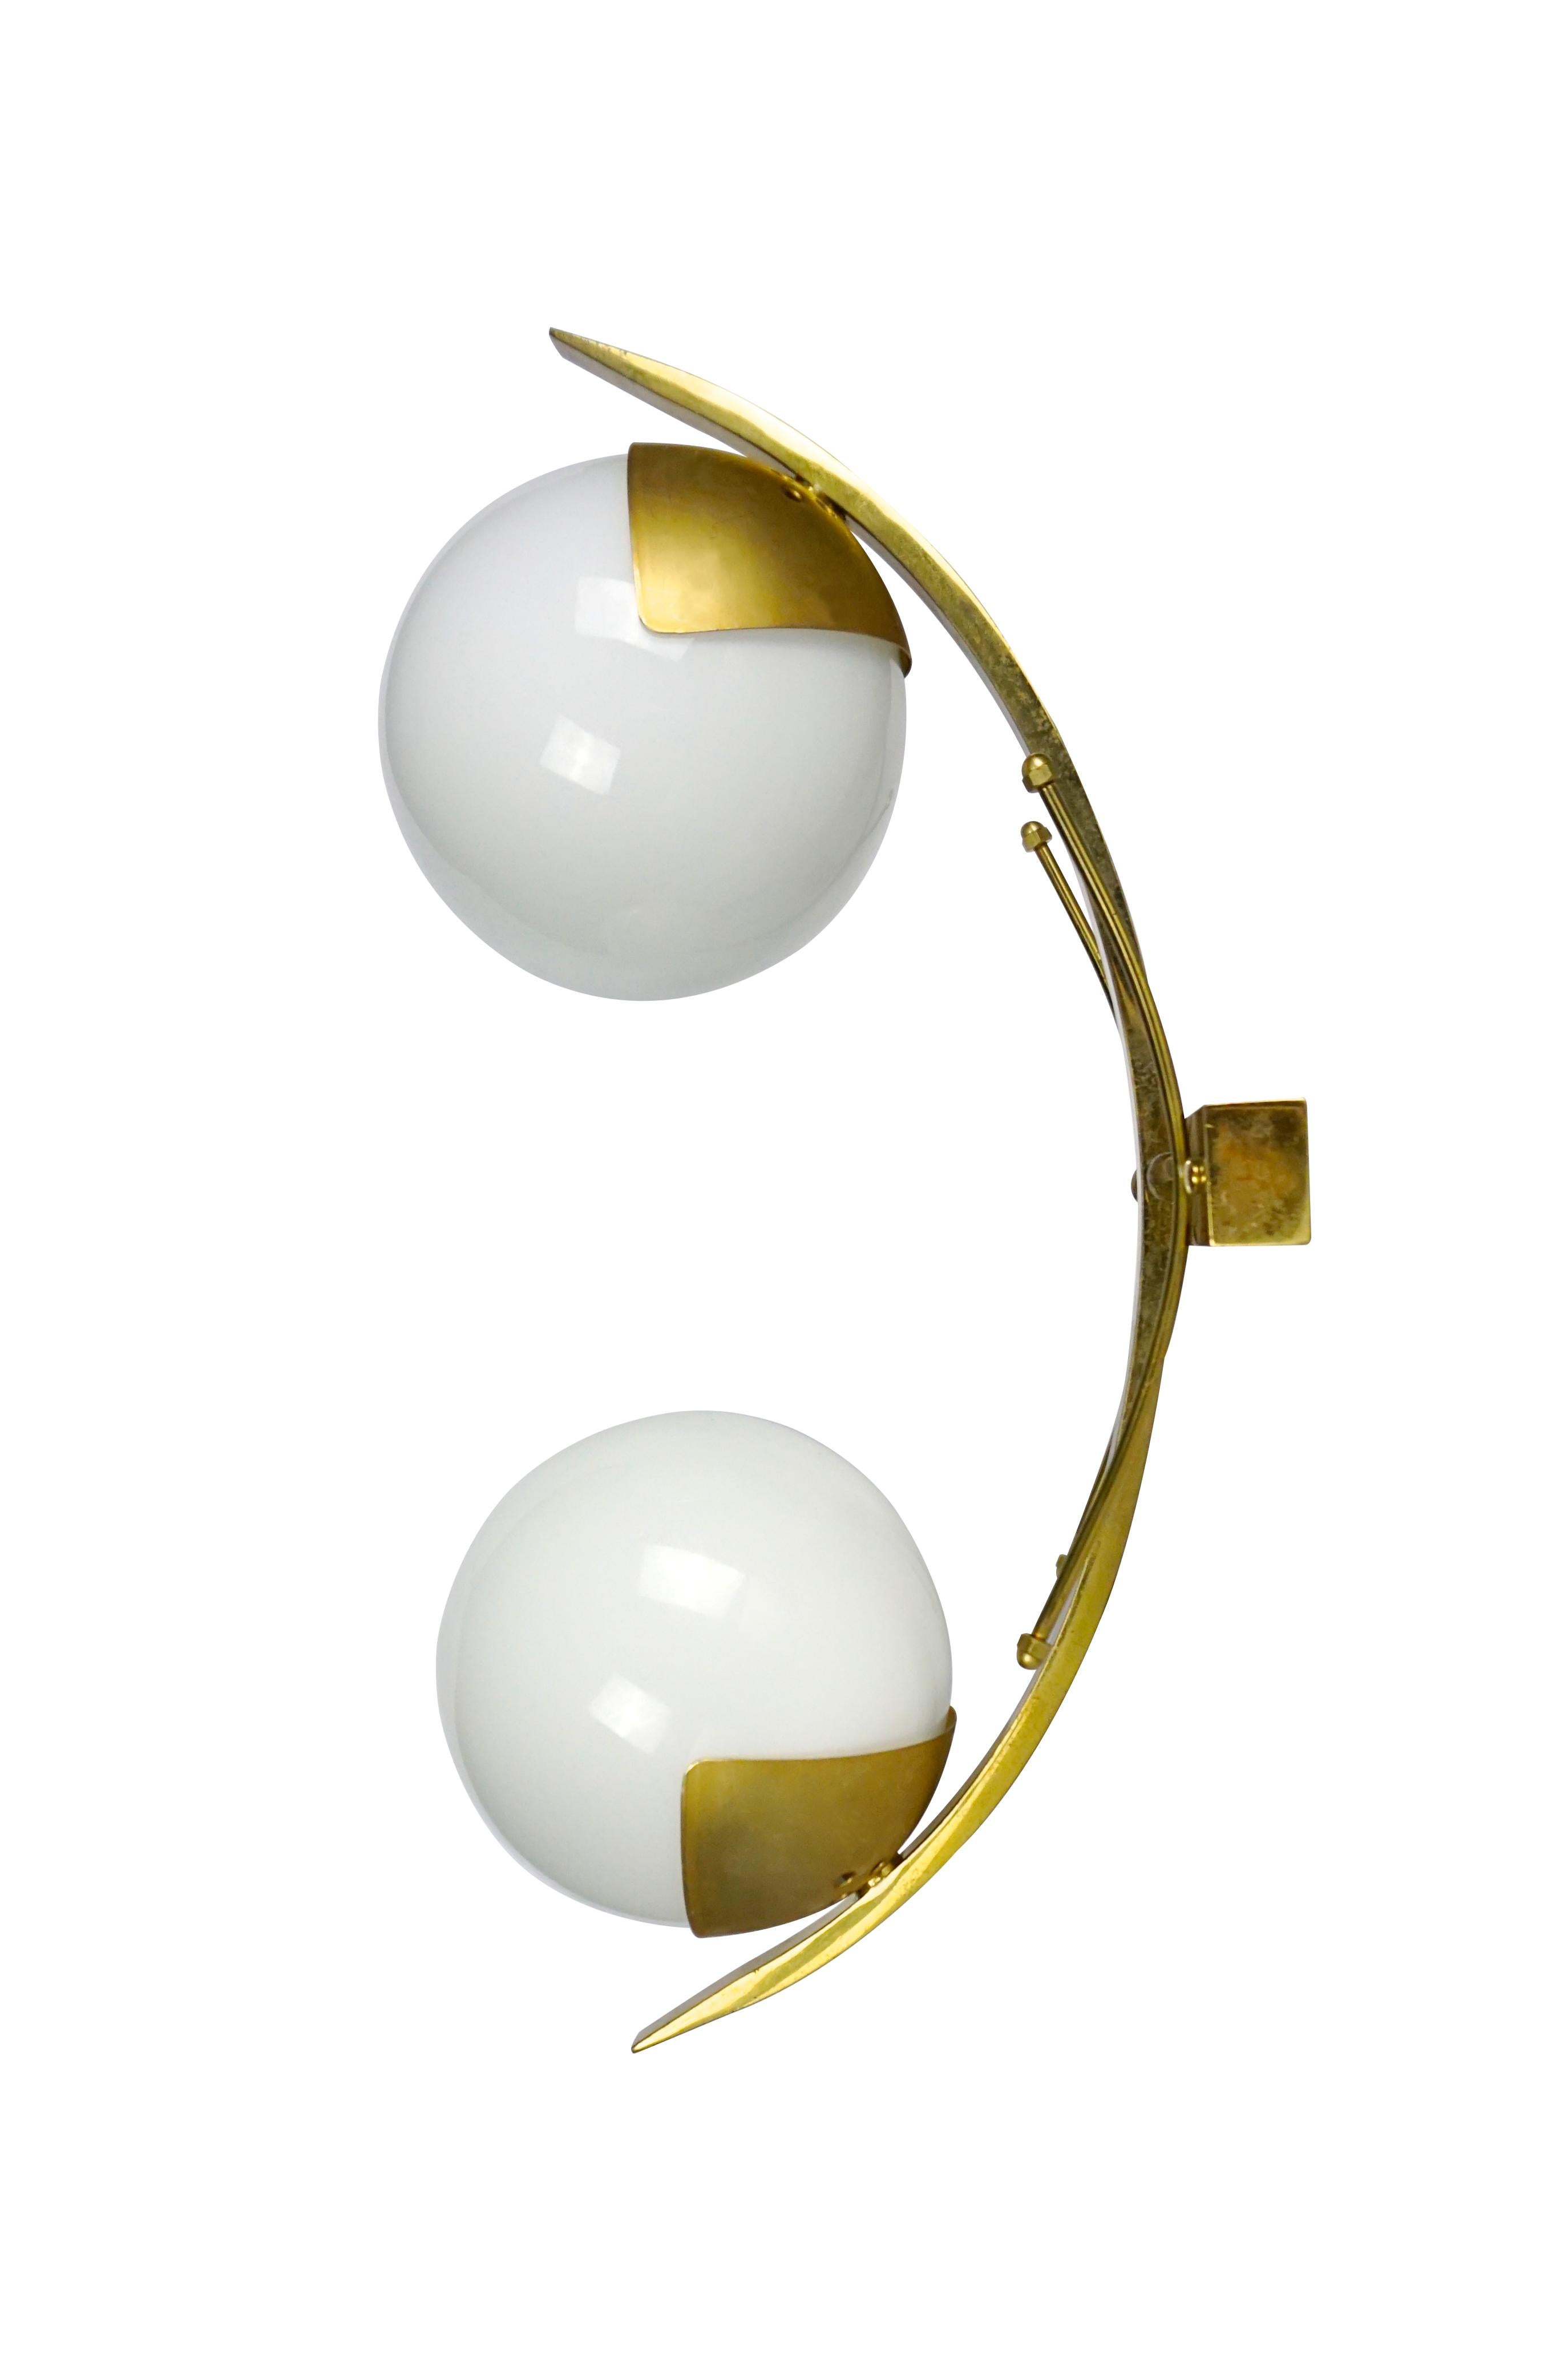 Elegant pair of wall lights or sconces each holding two opaline glass globe shades and brass frame, circa 1960's.
-Made in Italy
-Dimensions: H 42 x W 15 x D 23 cm.